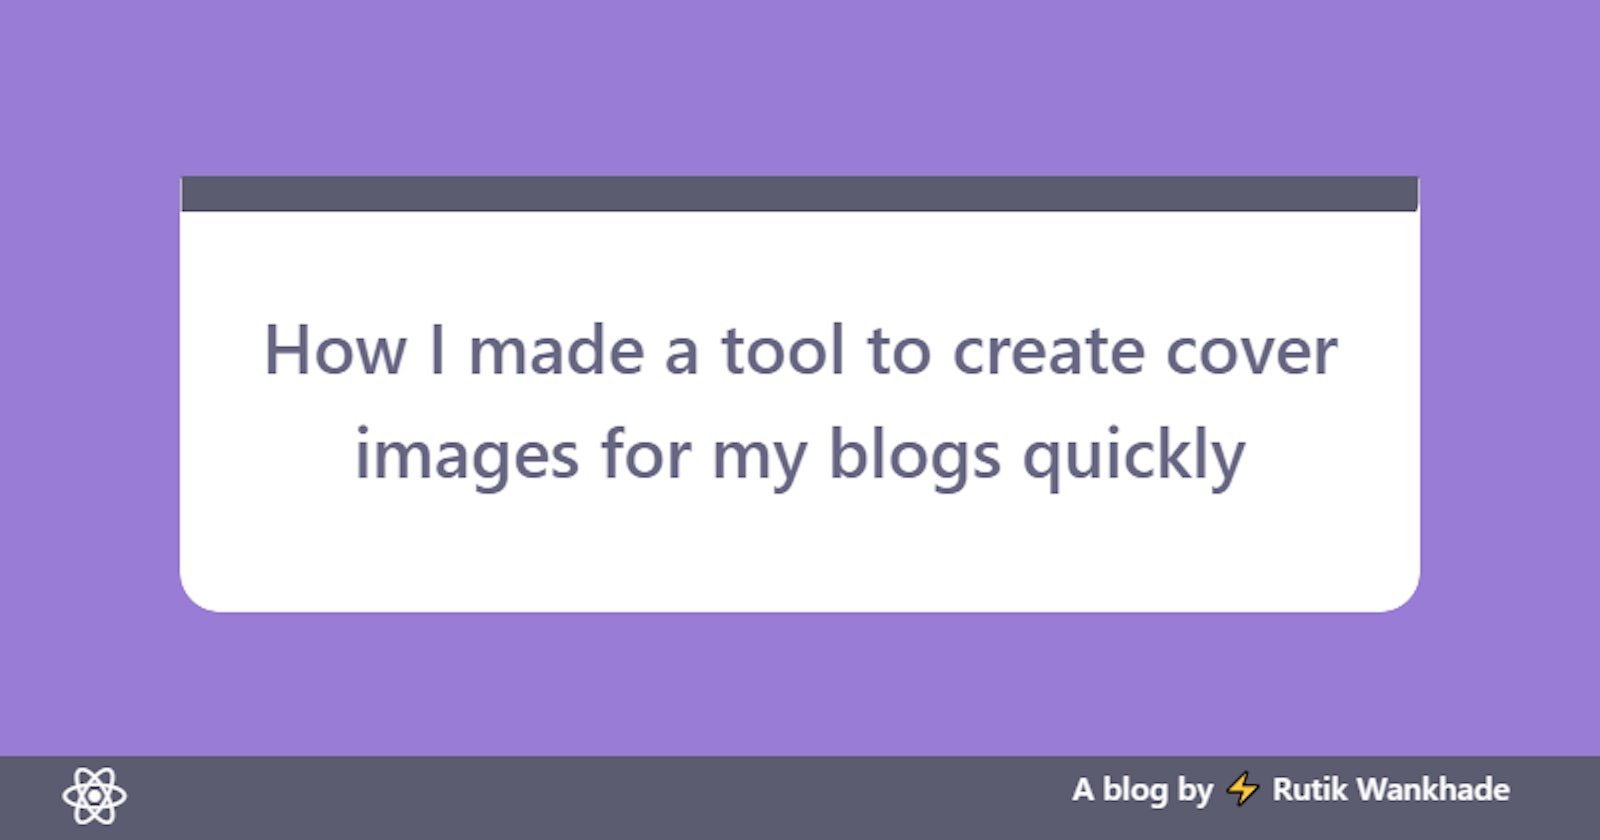 How I made a tool to create cover images for my blogs quickly